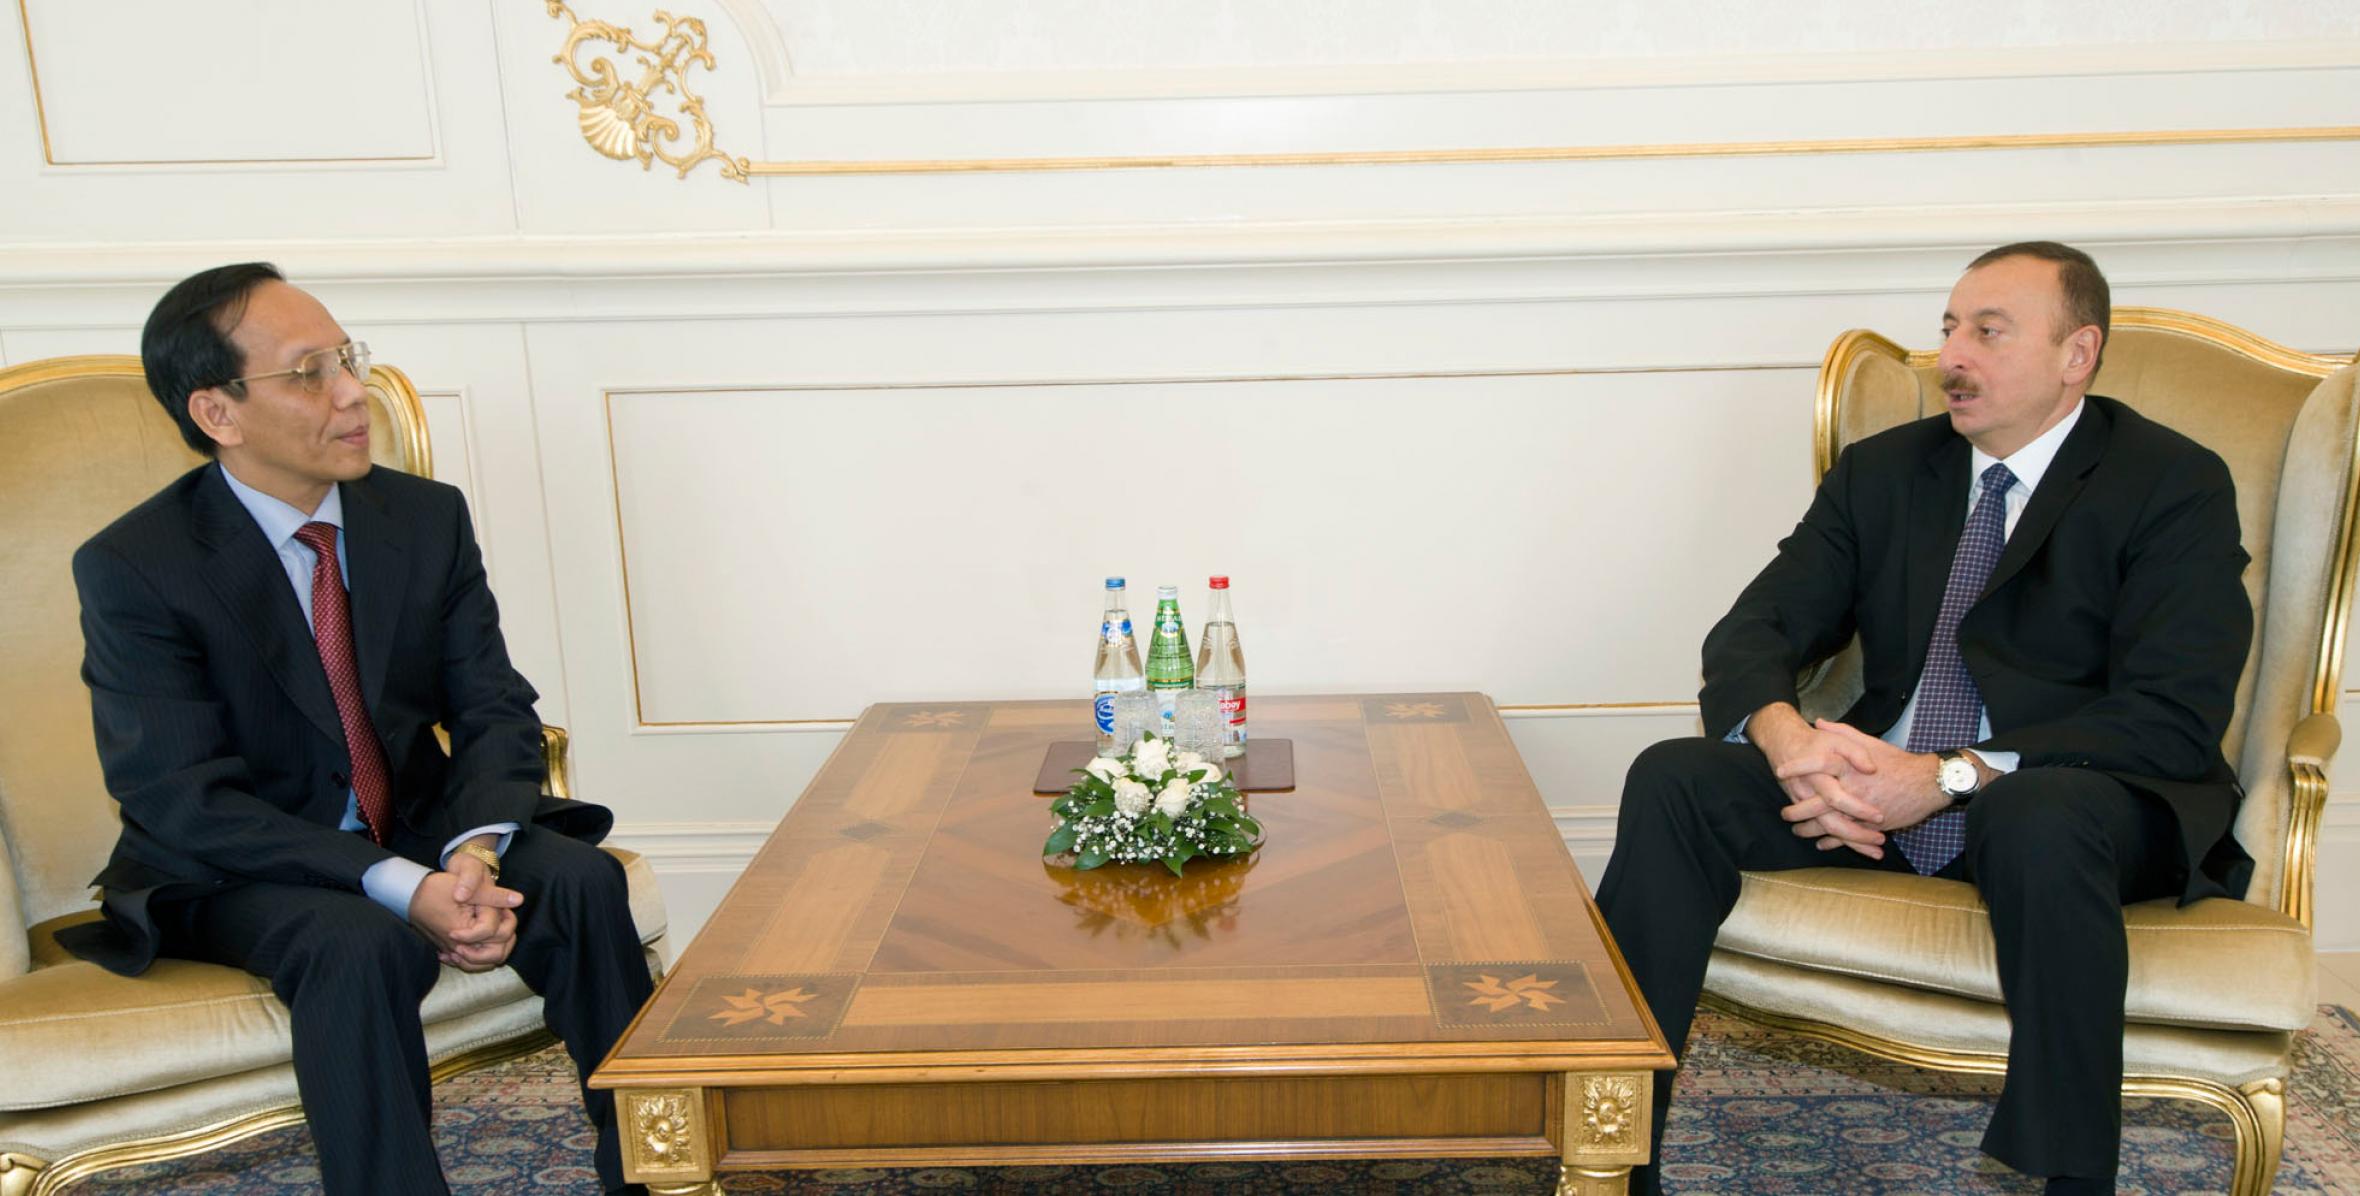 Ilham Aliyev accepted the credentials of the Ambassador of Vietnam to Azerbaijan, Mr. Fam Suan Shon